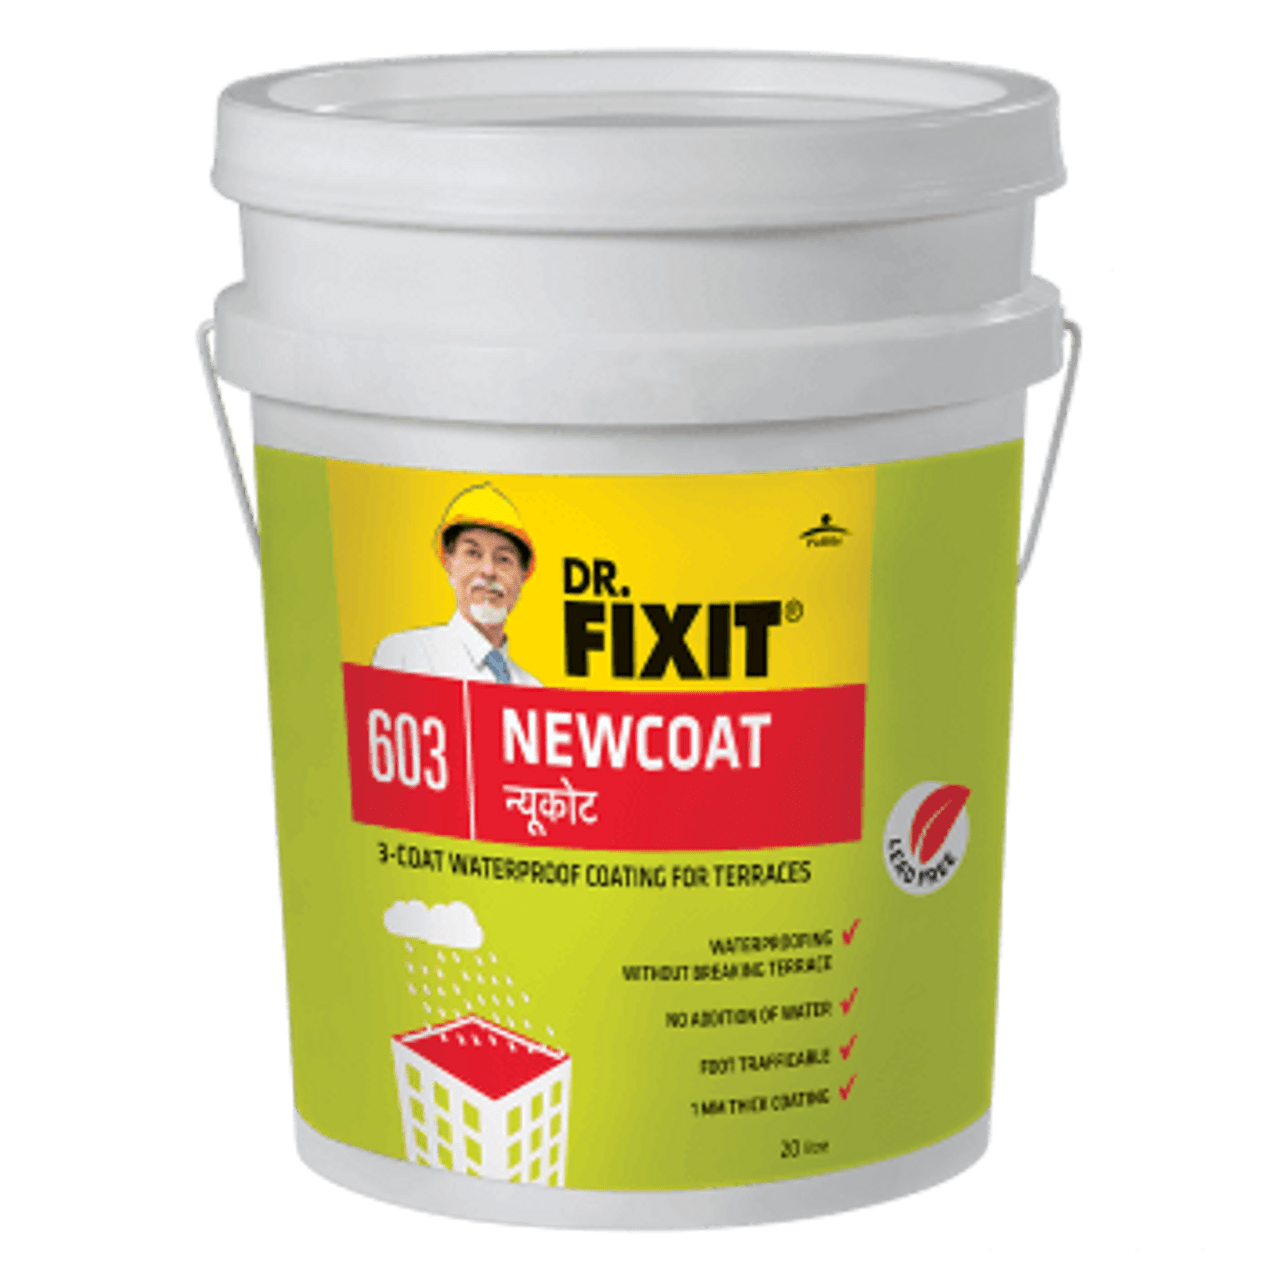 Dr._Fixit Newcoat